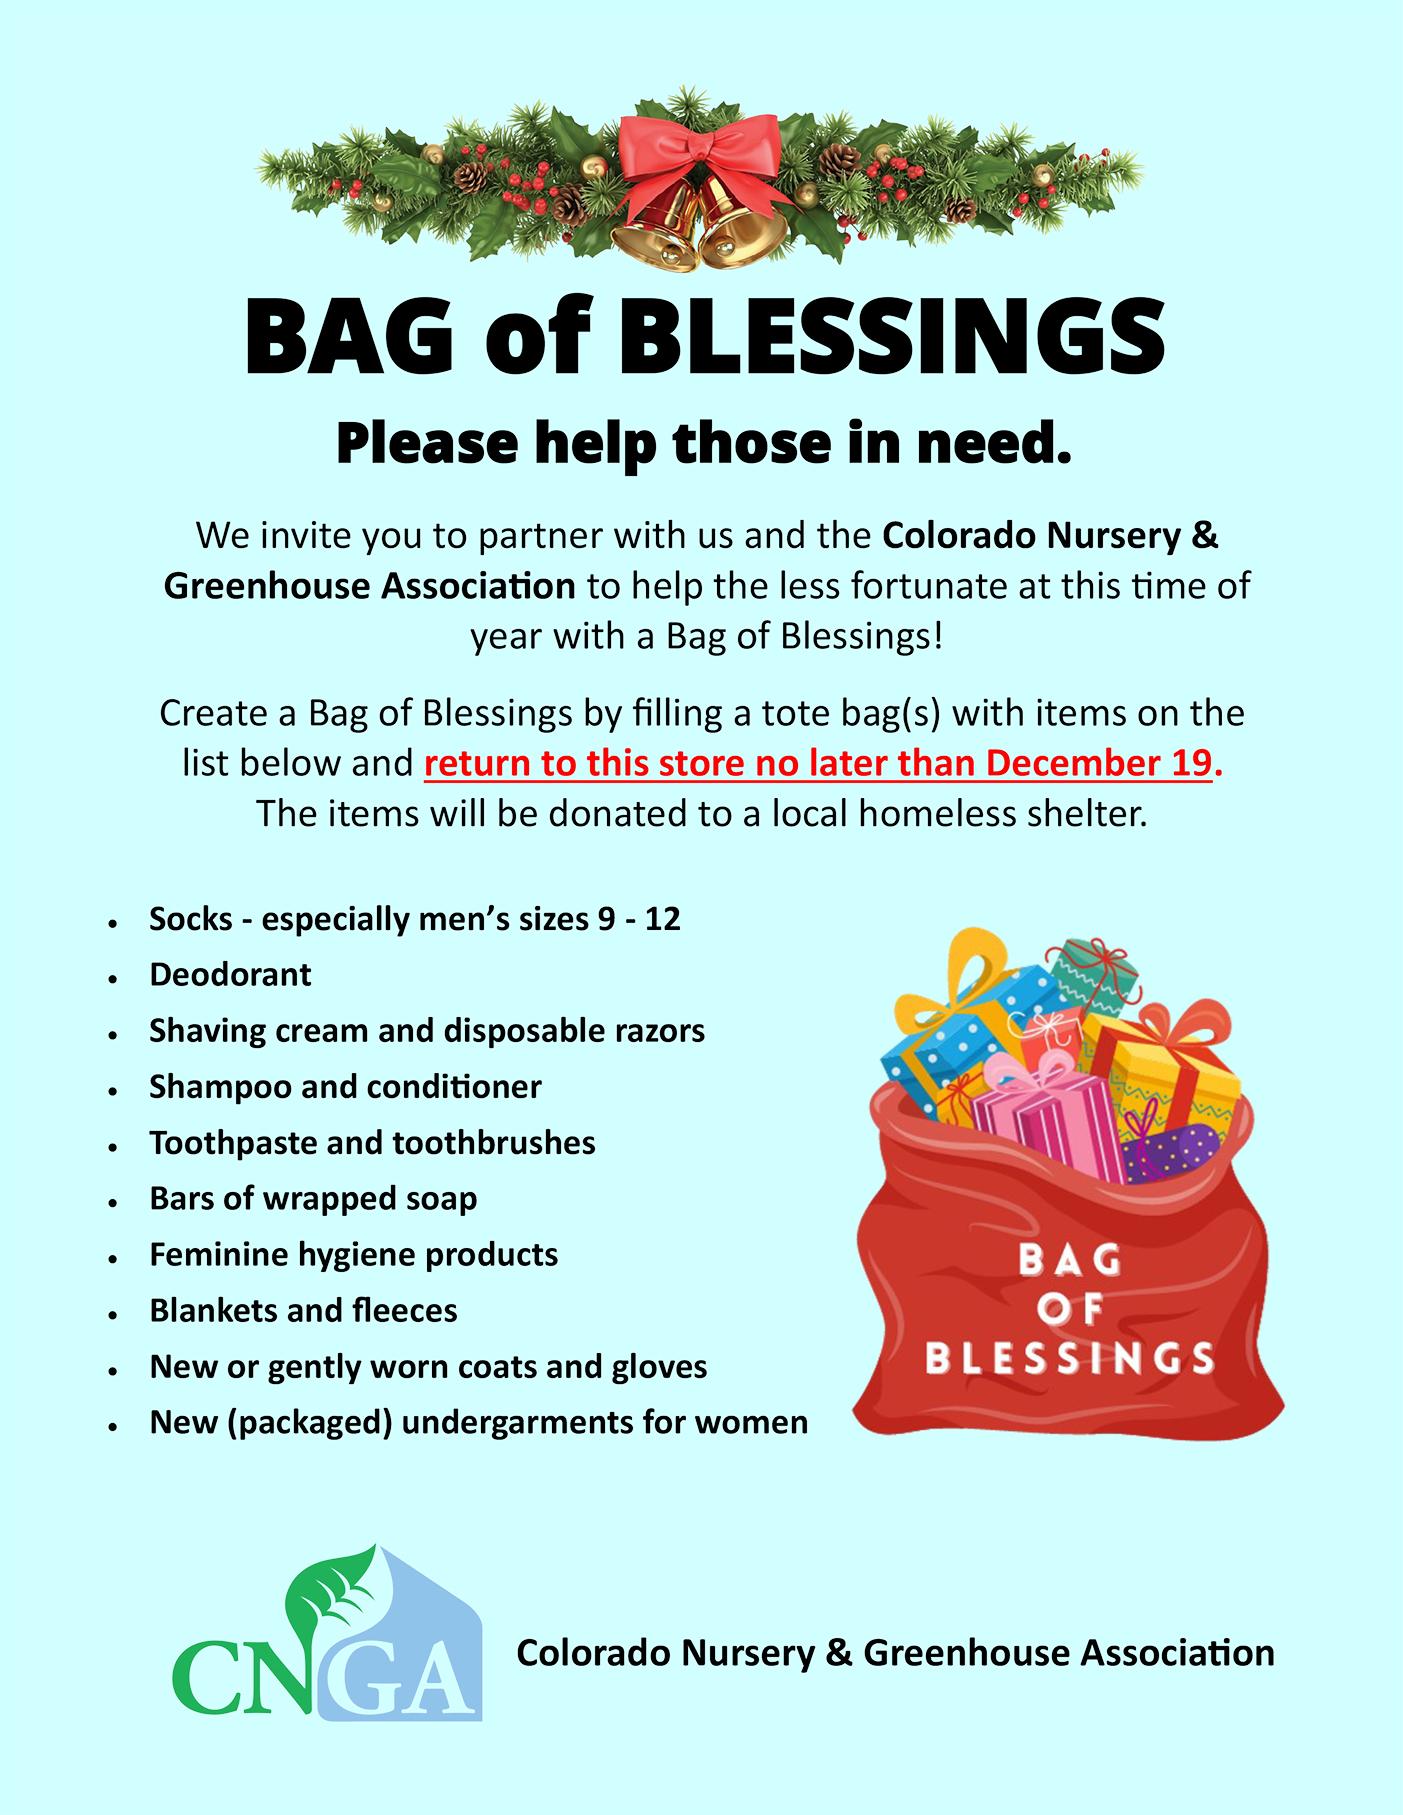 Bag of Blessings Donation Drive for the Homeless by CNGA - Tagawa